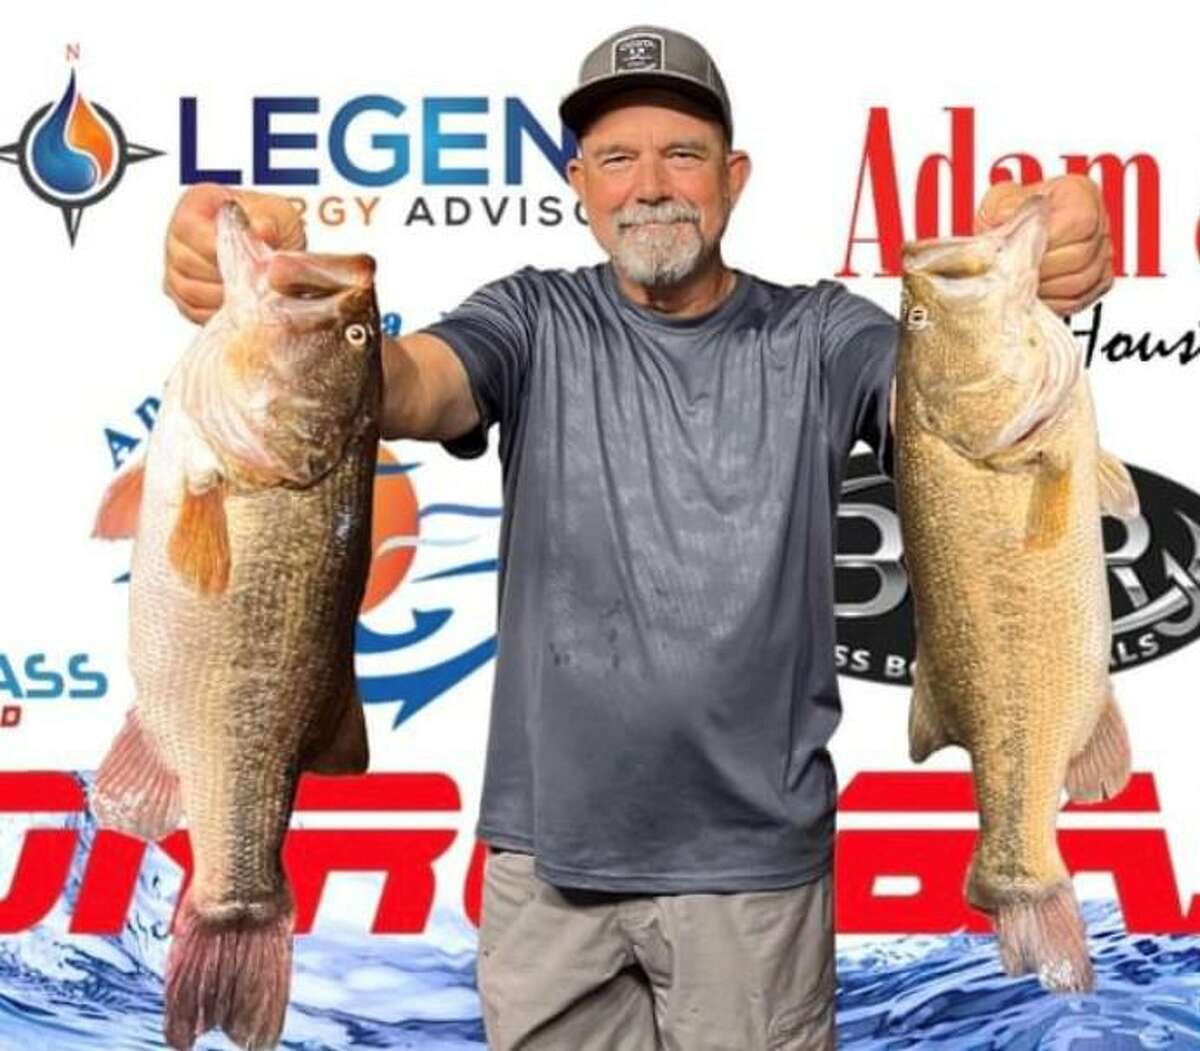 Randy Gunter and Mickey Mueller came in first place in the CONROEBASS Tuesday Tournament with a stringer weight of 12.41 pounds.